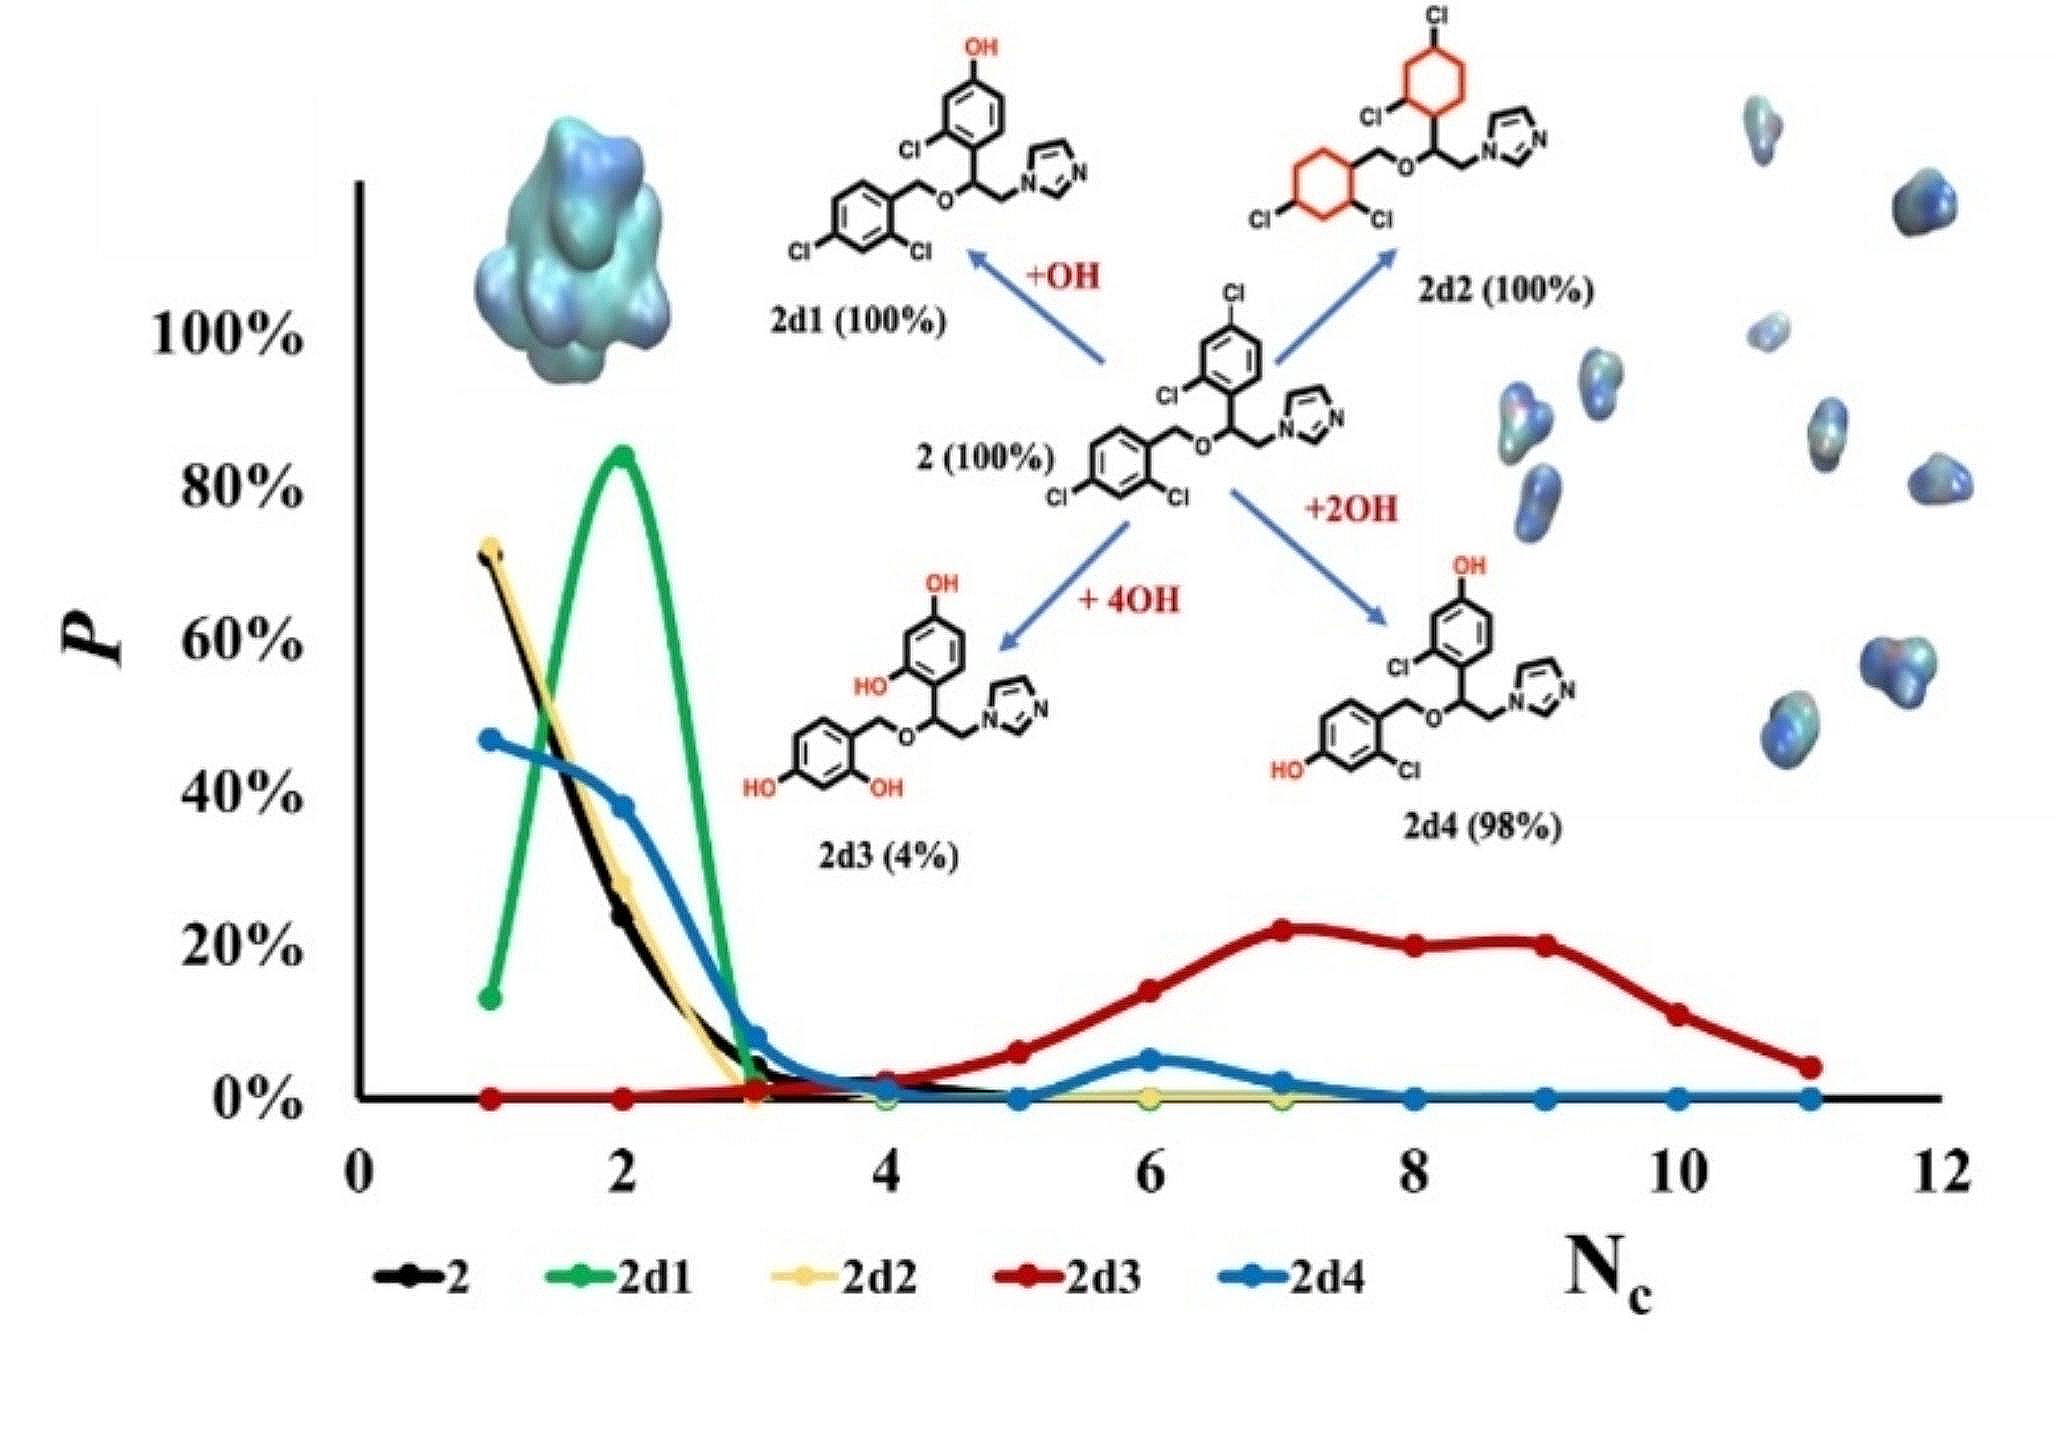 Molecular dynamics simulations as a guide for modulating small molecule aggregation